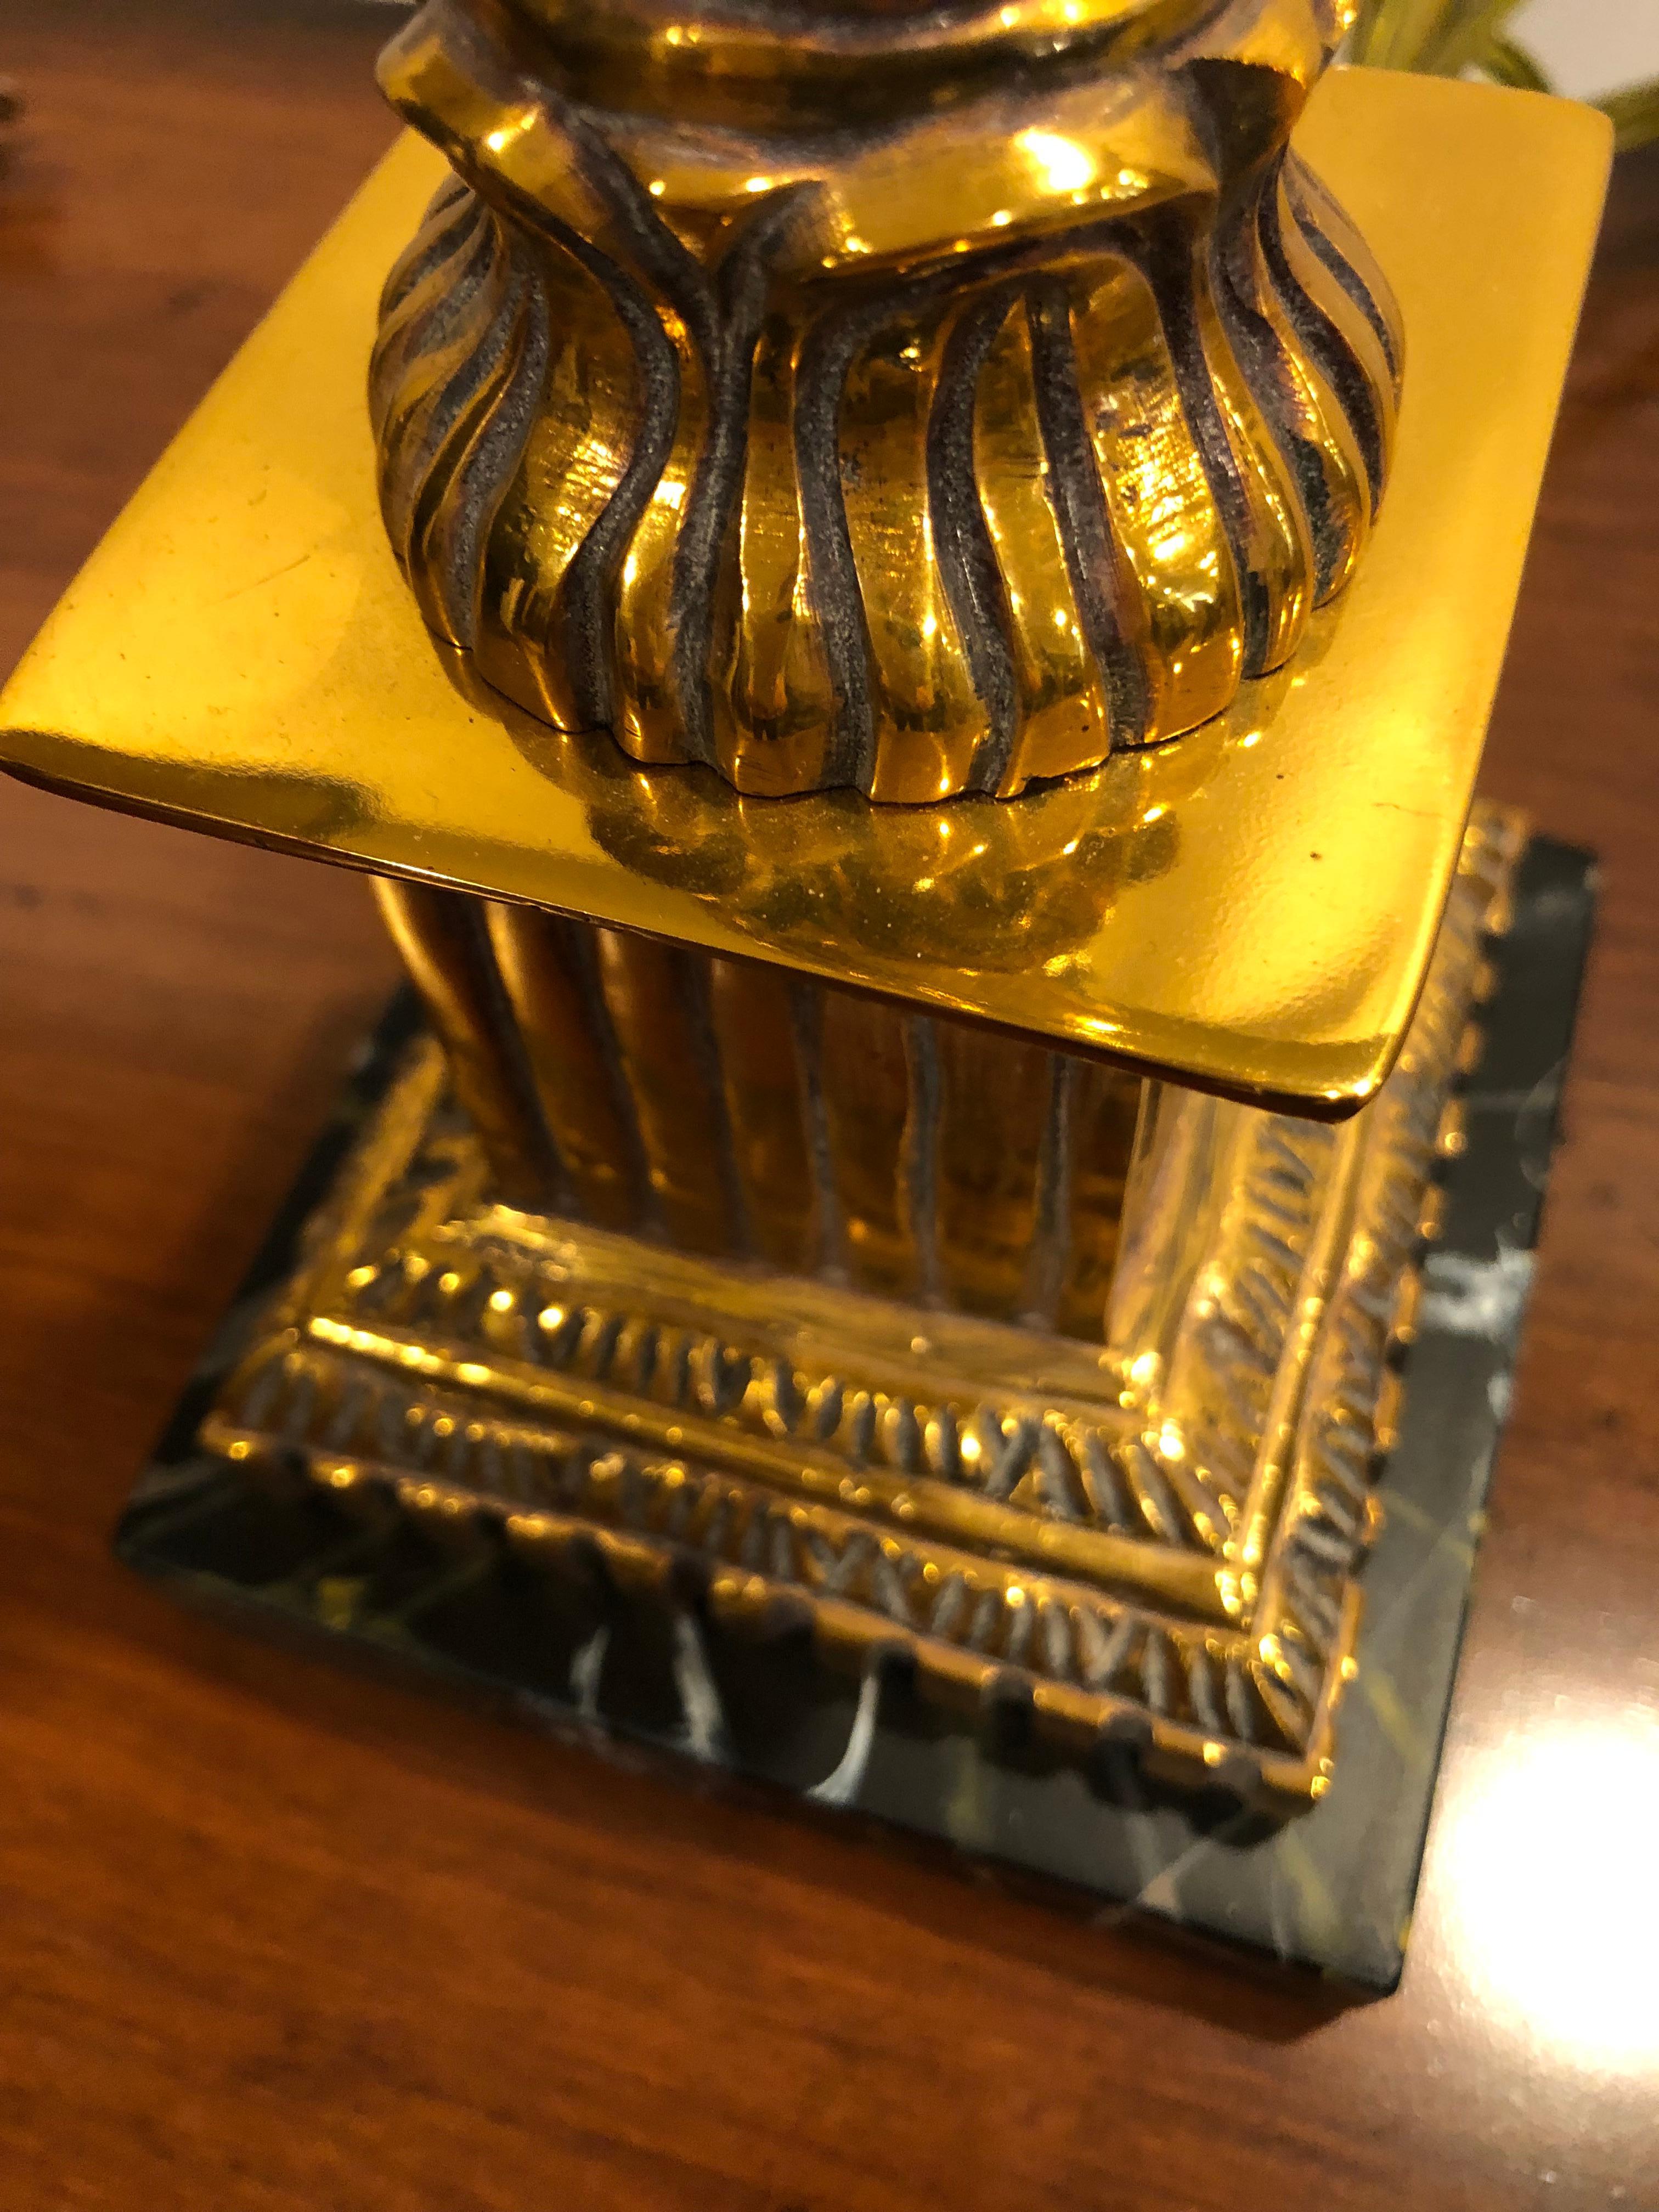 Glamorous glistening warm coppery colored brass table lamps in the shape of neoclassical columns that rest on black marble 4.5 square bases. Custom textured fabric lampshades are a great elegant complement.